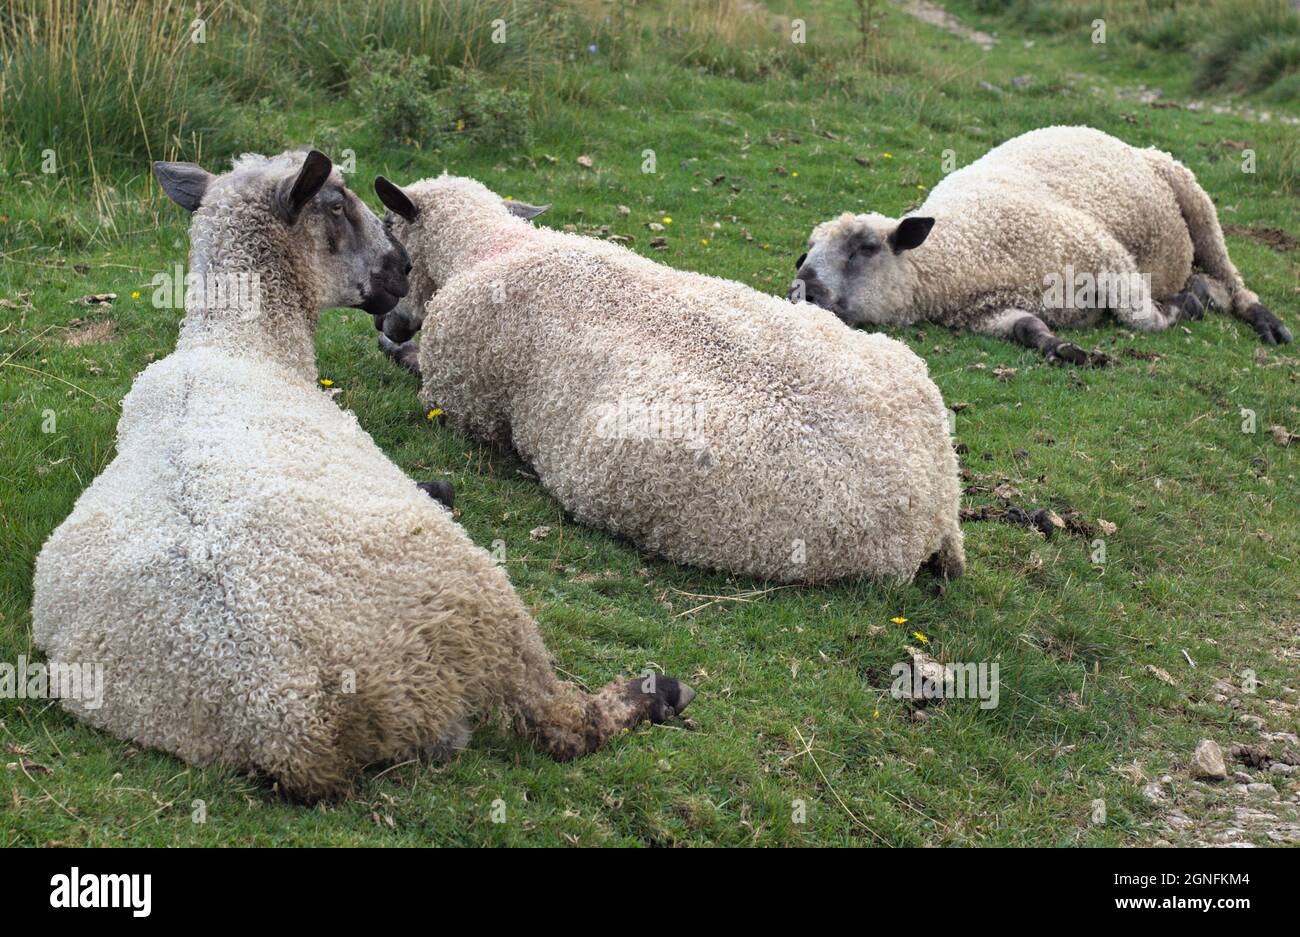 rams besides Starbotton Cam Road near Starbotton Cam Pasture Wharfedale Craven Yorkshire Dales NP Stock Photo